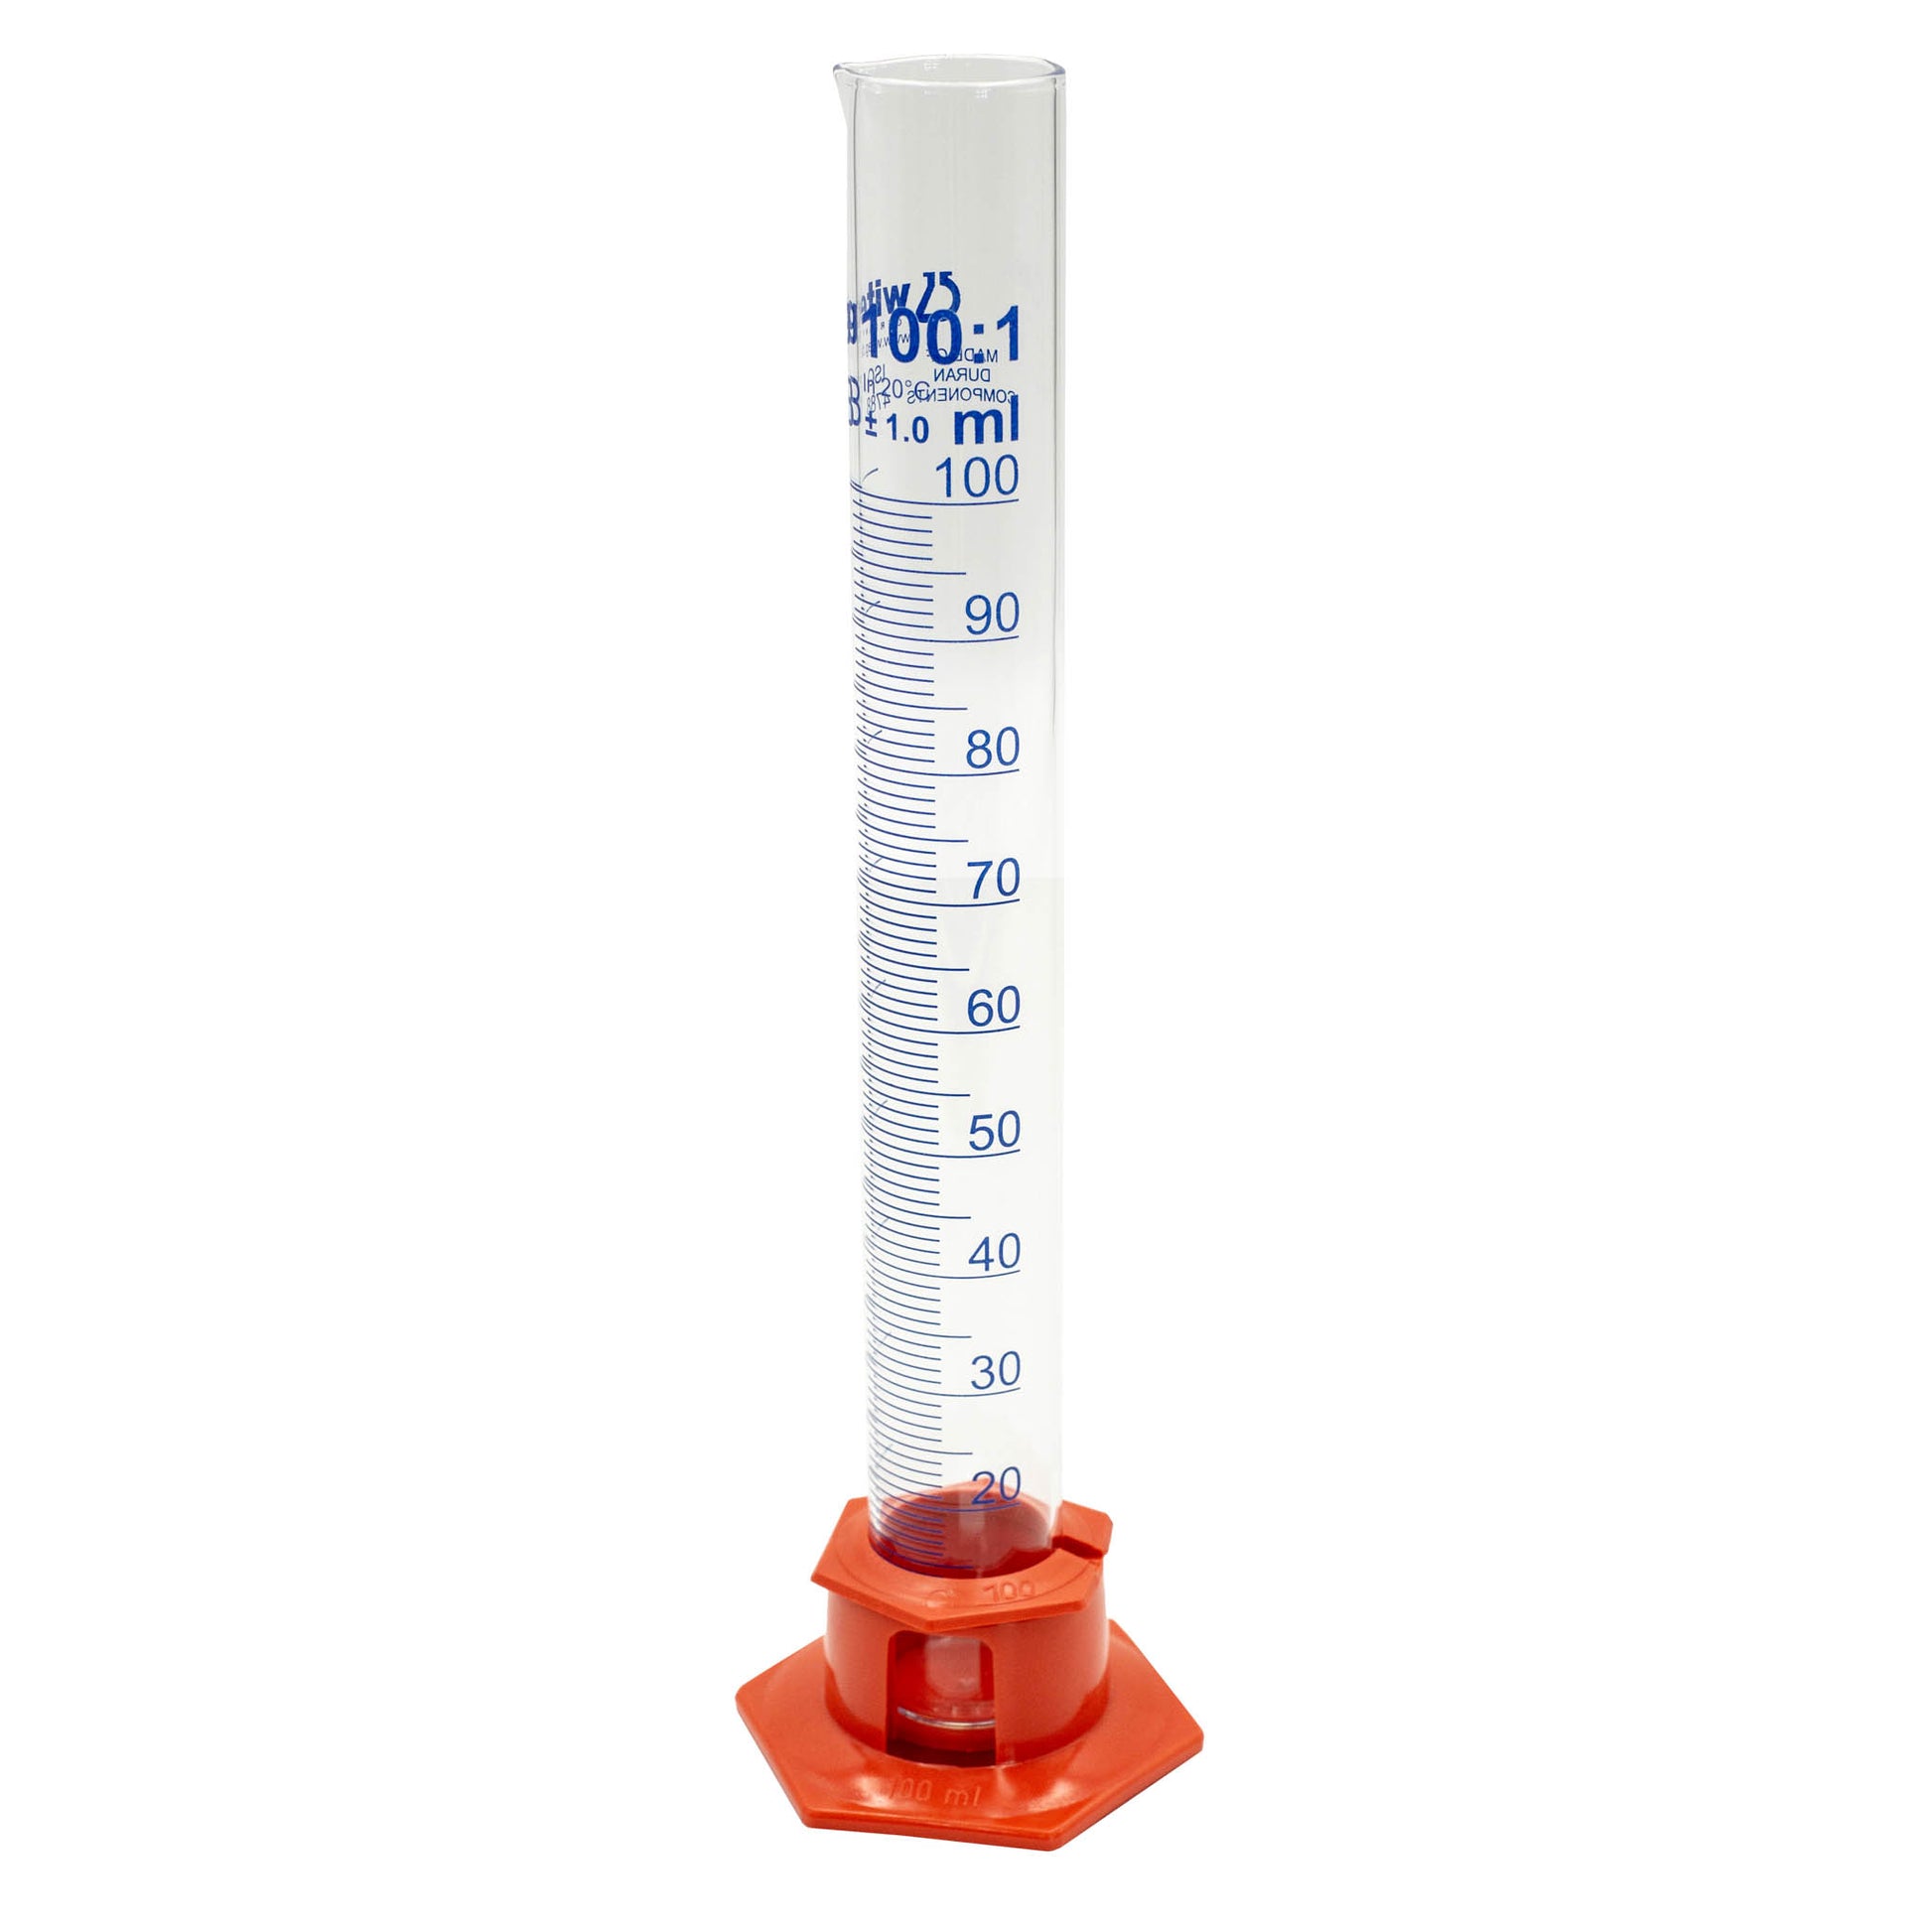 100ml glass measuring cylinder with plastic base and place holder. Measures in 1ml increments. 